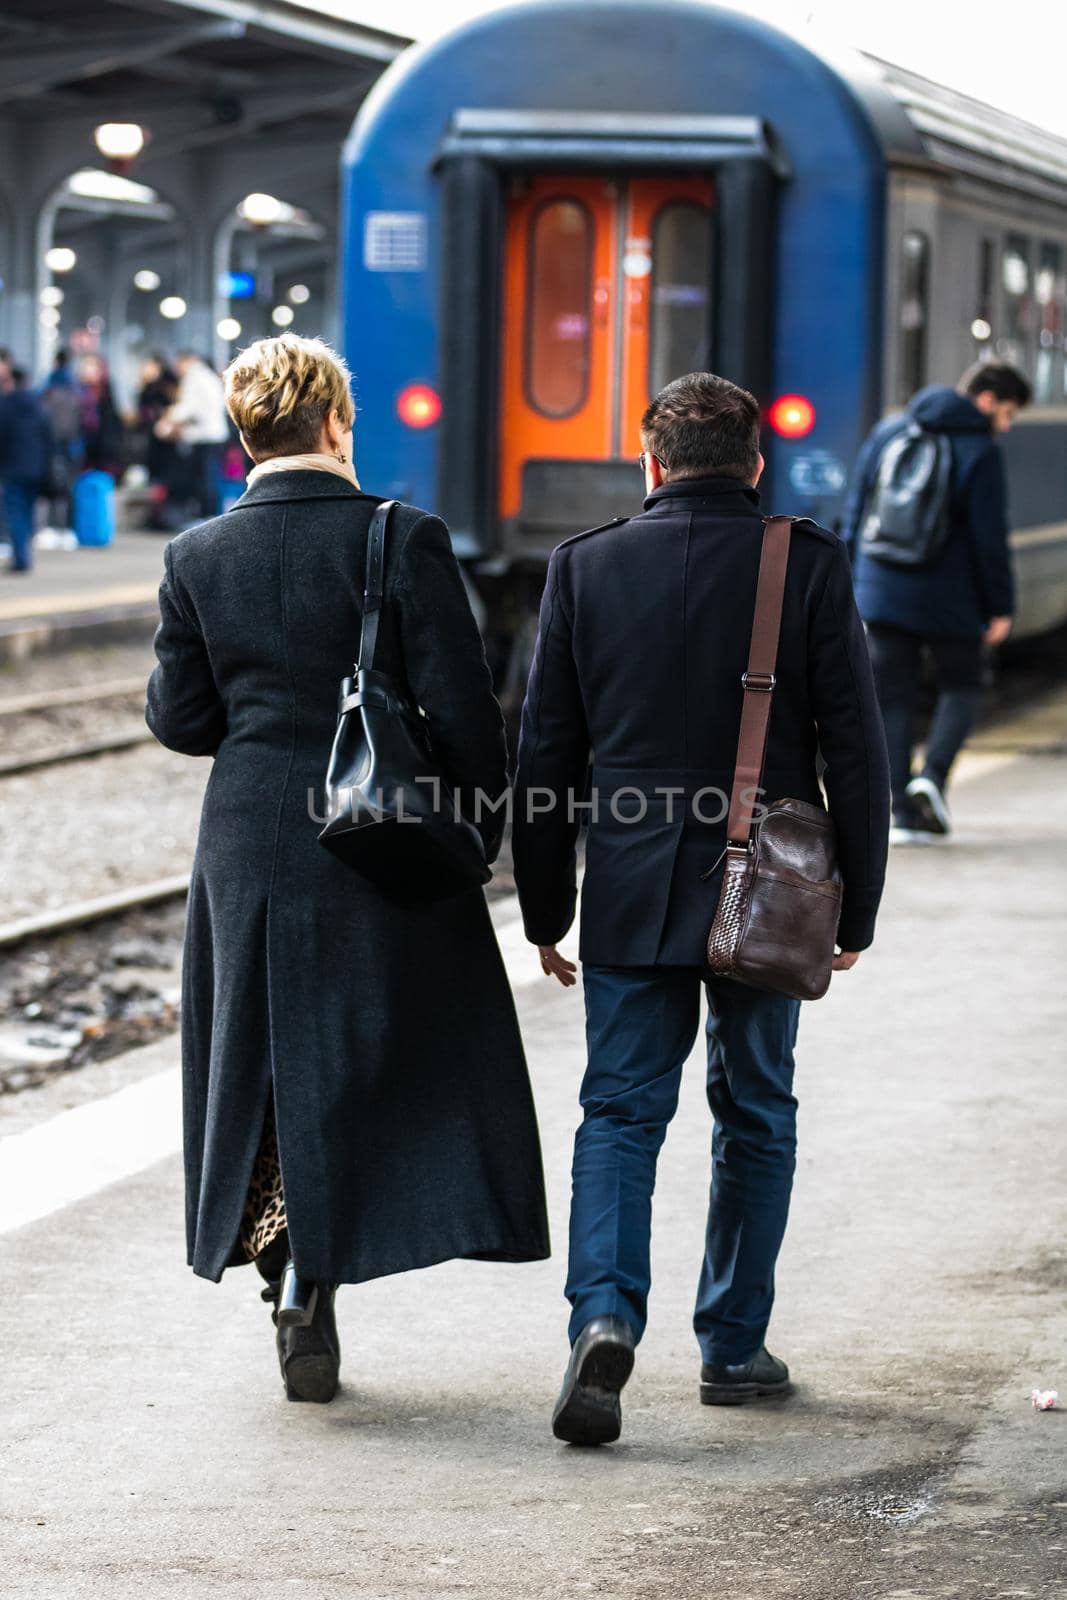 Travelers and commuters waiting for a train on the train platform of Bucharest North Railway Station (Gara de Nord Bucharest) in Bucharest, Romania, 2022 by vladispas